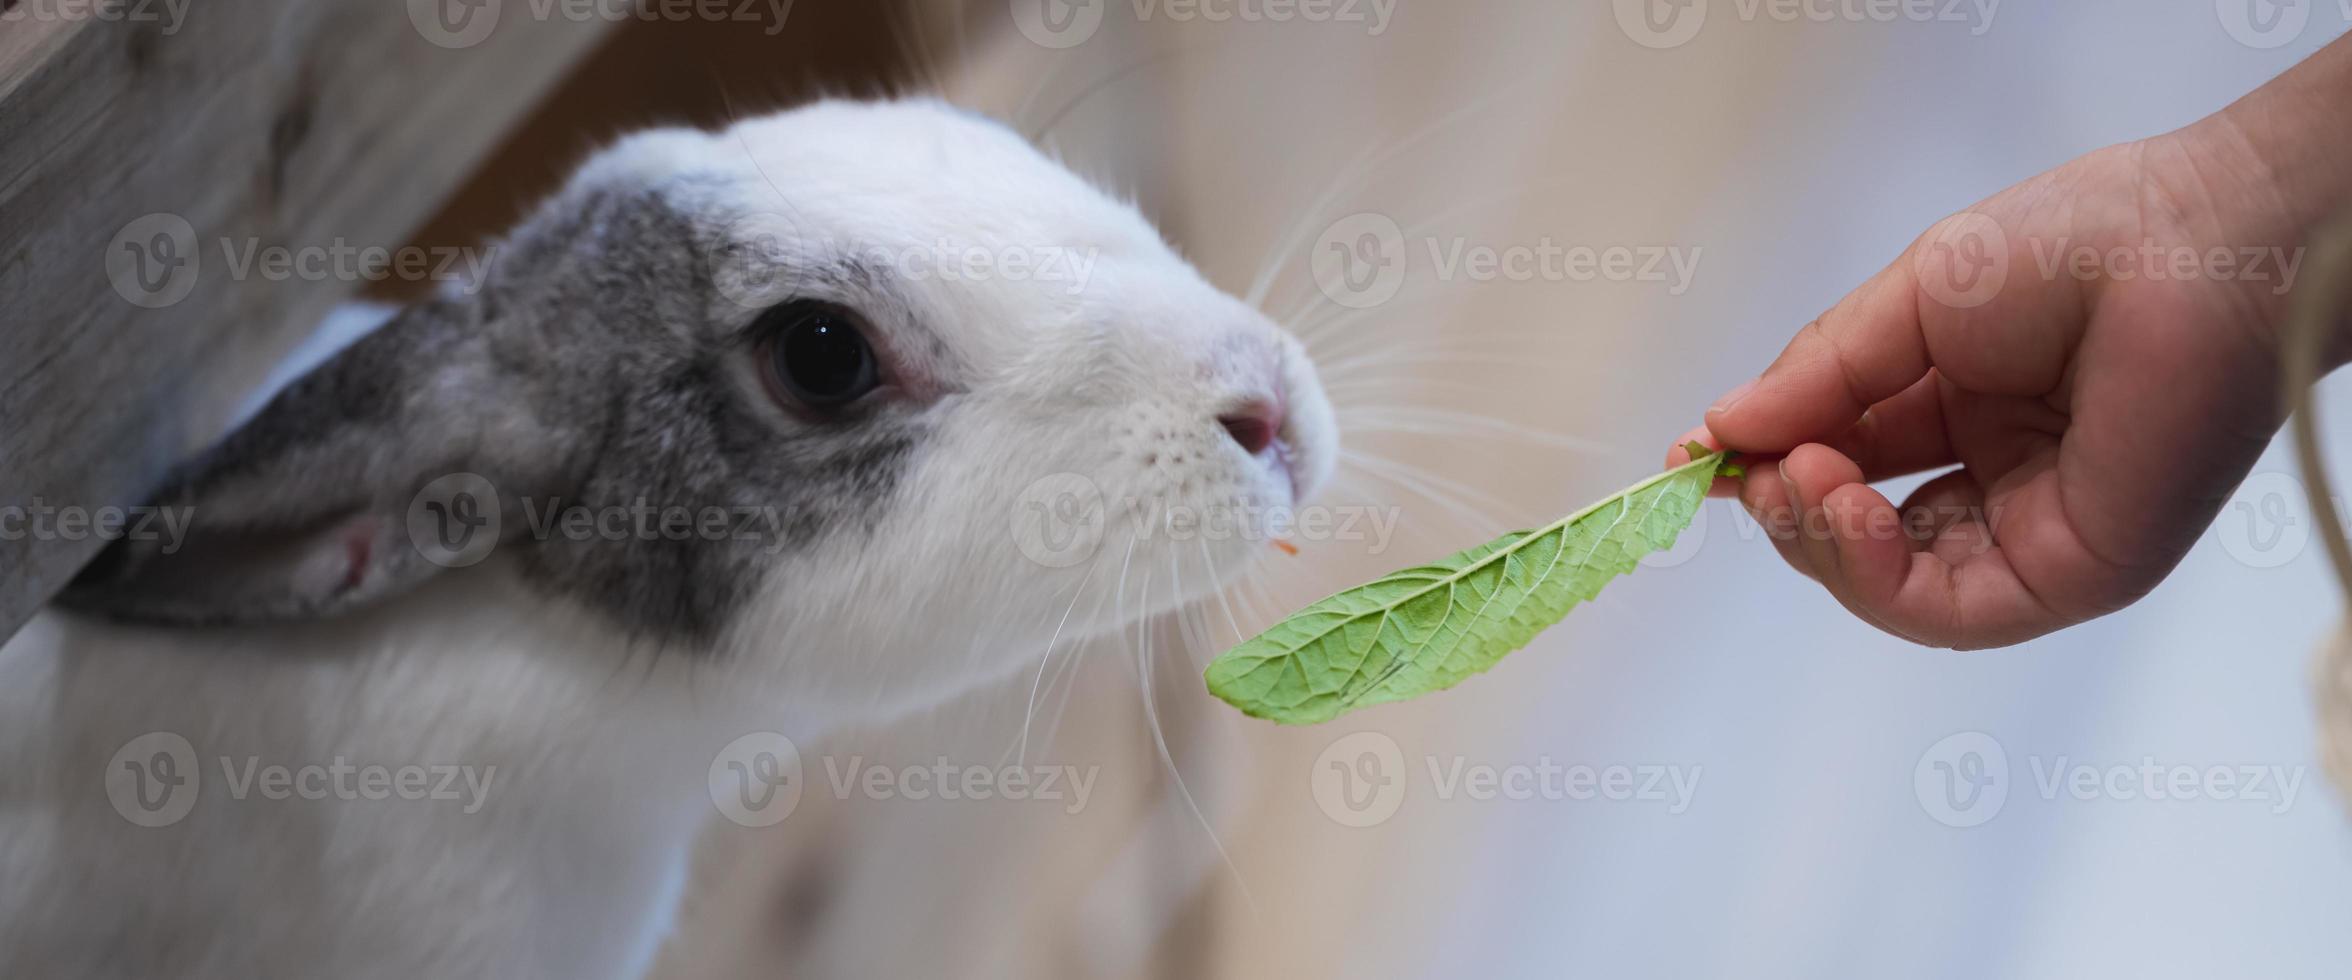 Little rabbit was sniffing sweet basil leaves that human hand was giving it to eat. Pets are in cages. photo